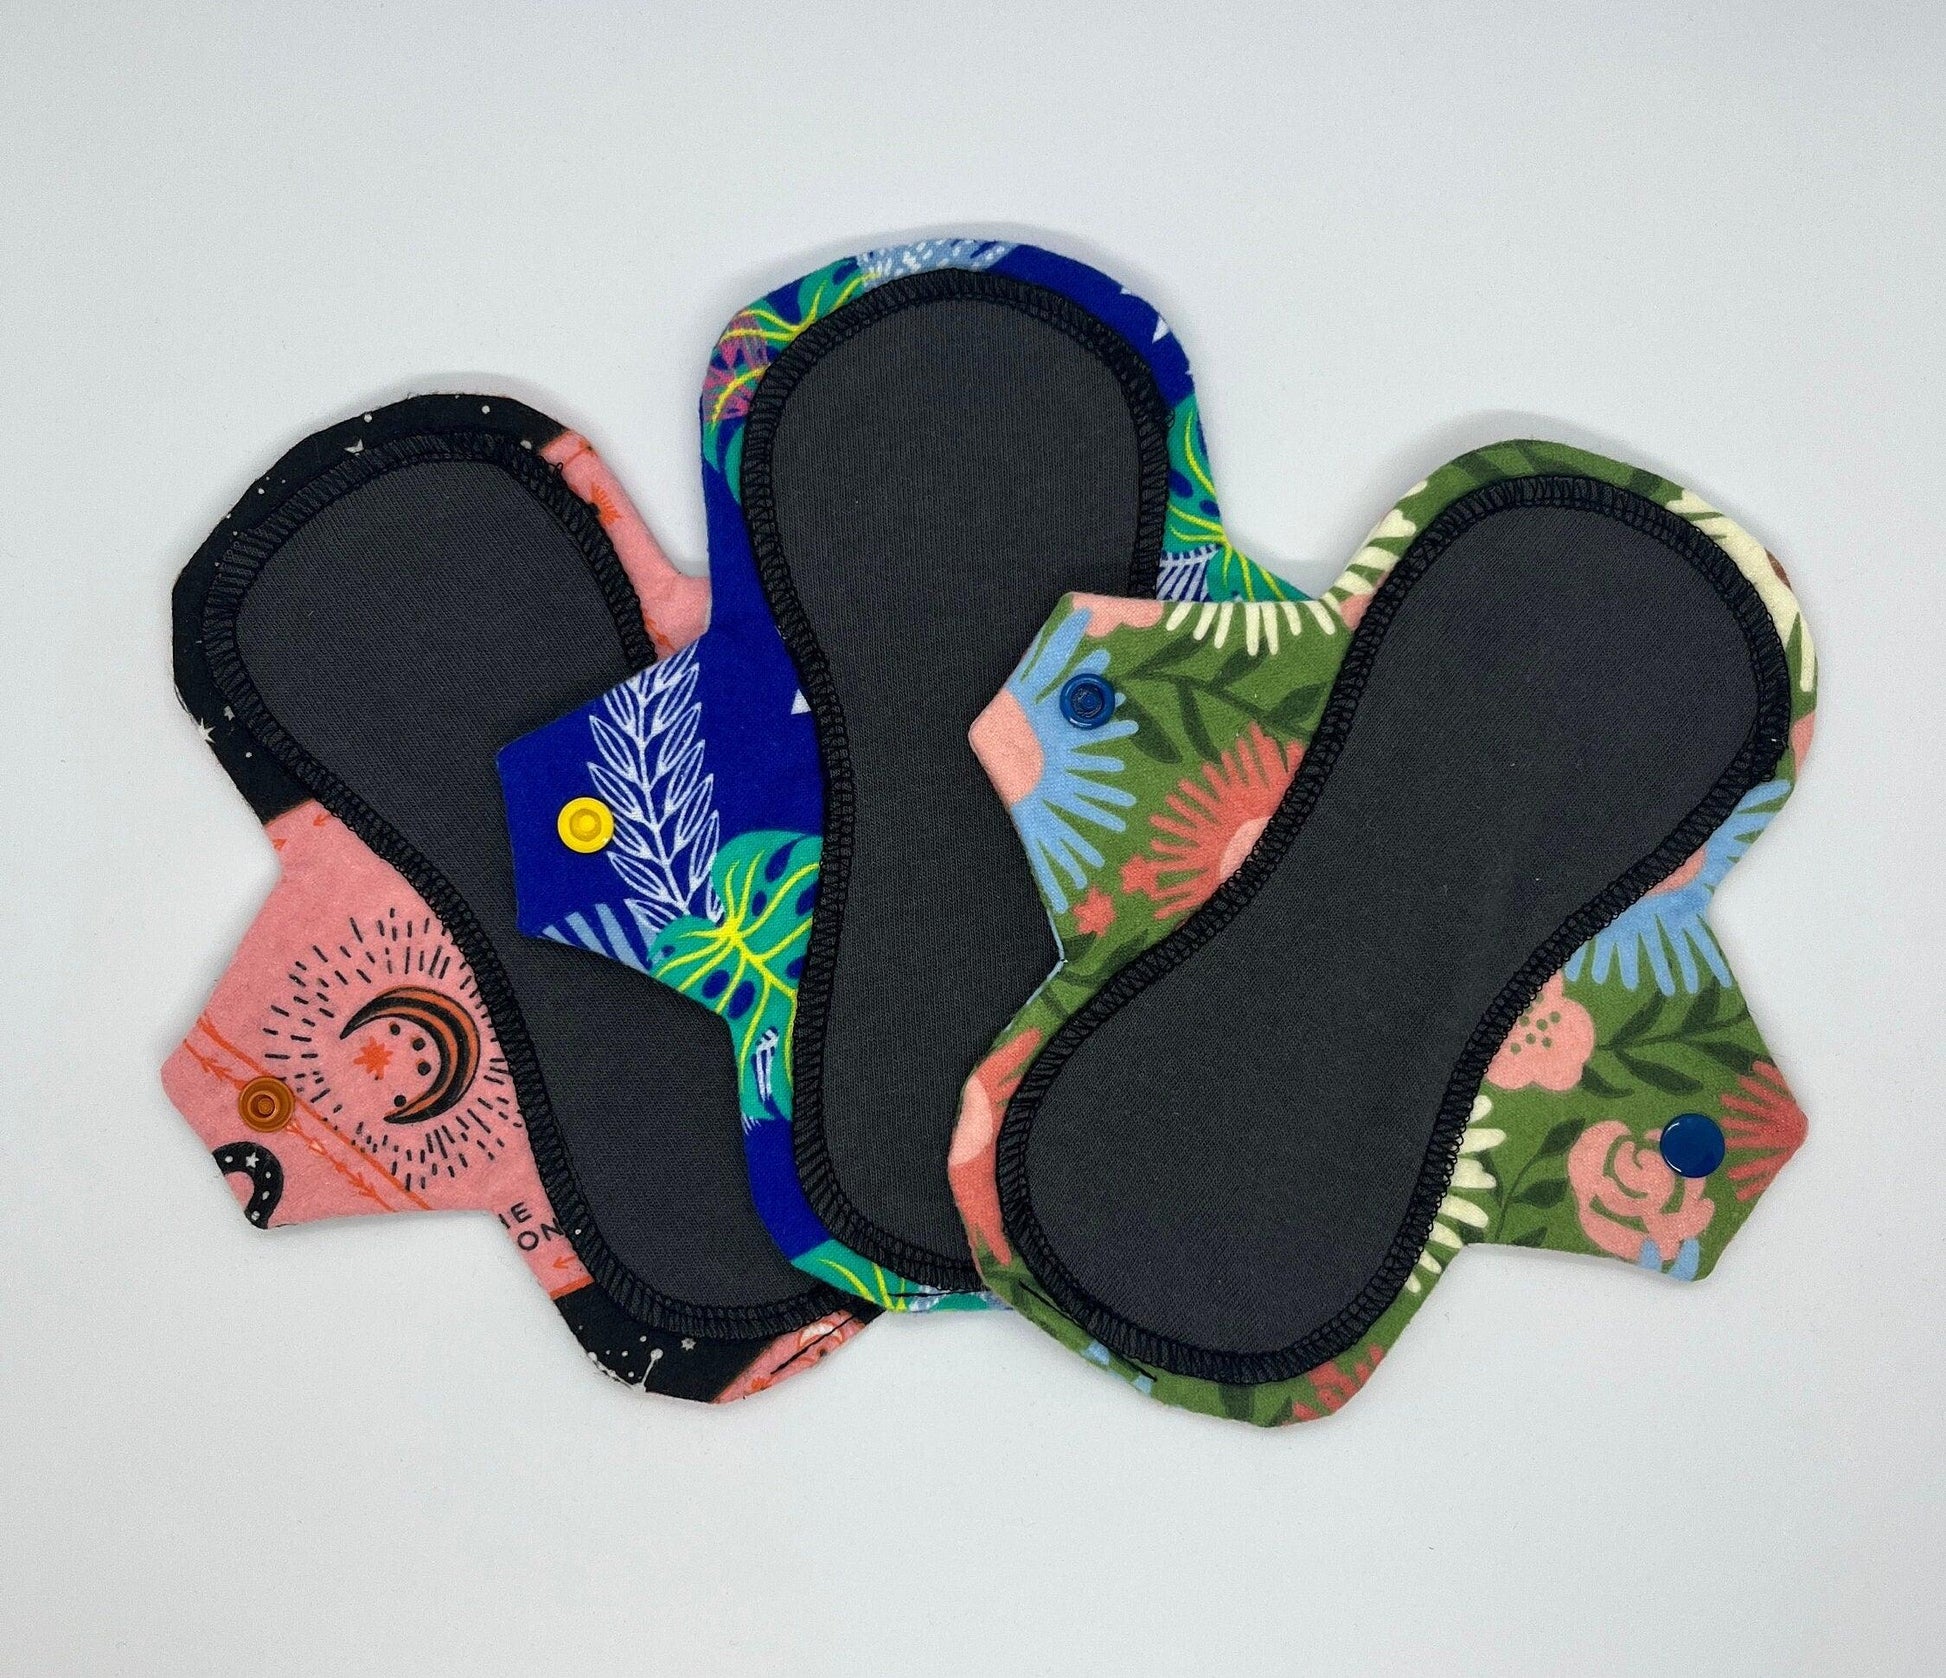 Cotton eco-friendly reusable panty liners (Light) - Earth Friendly Options